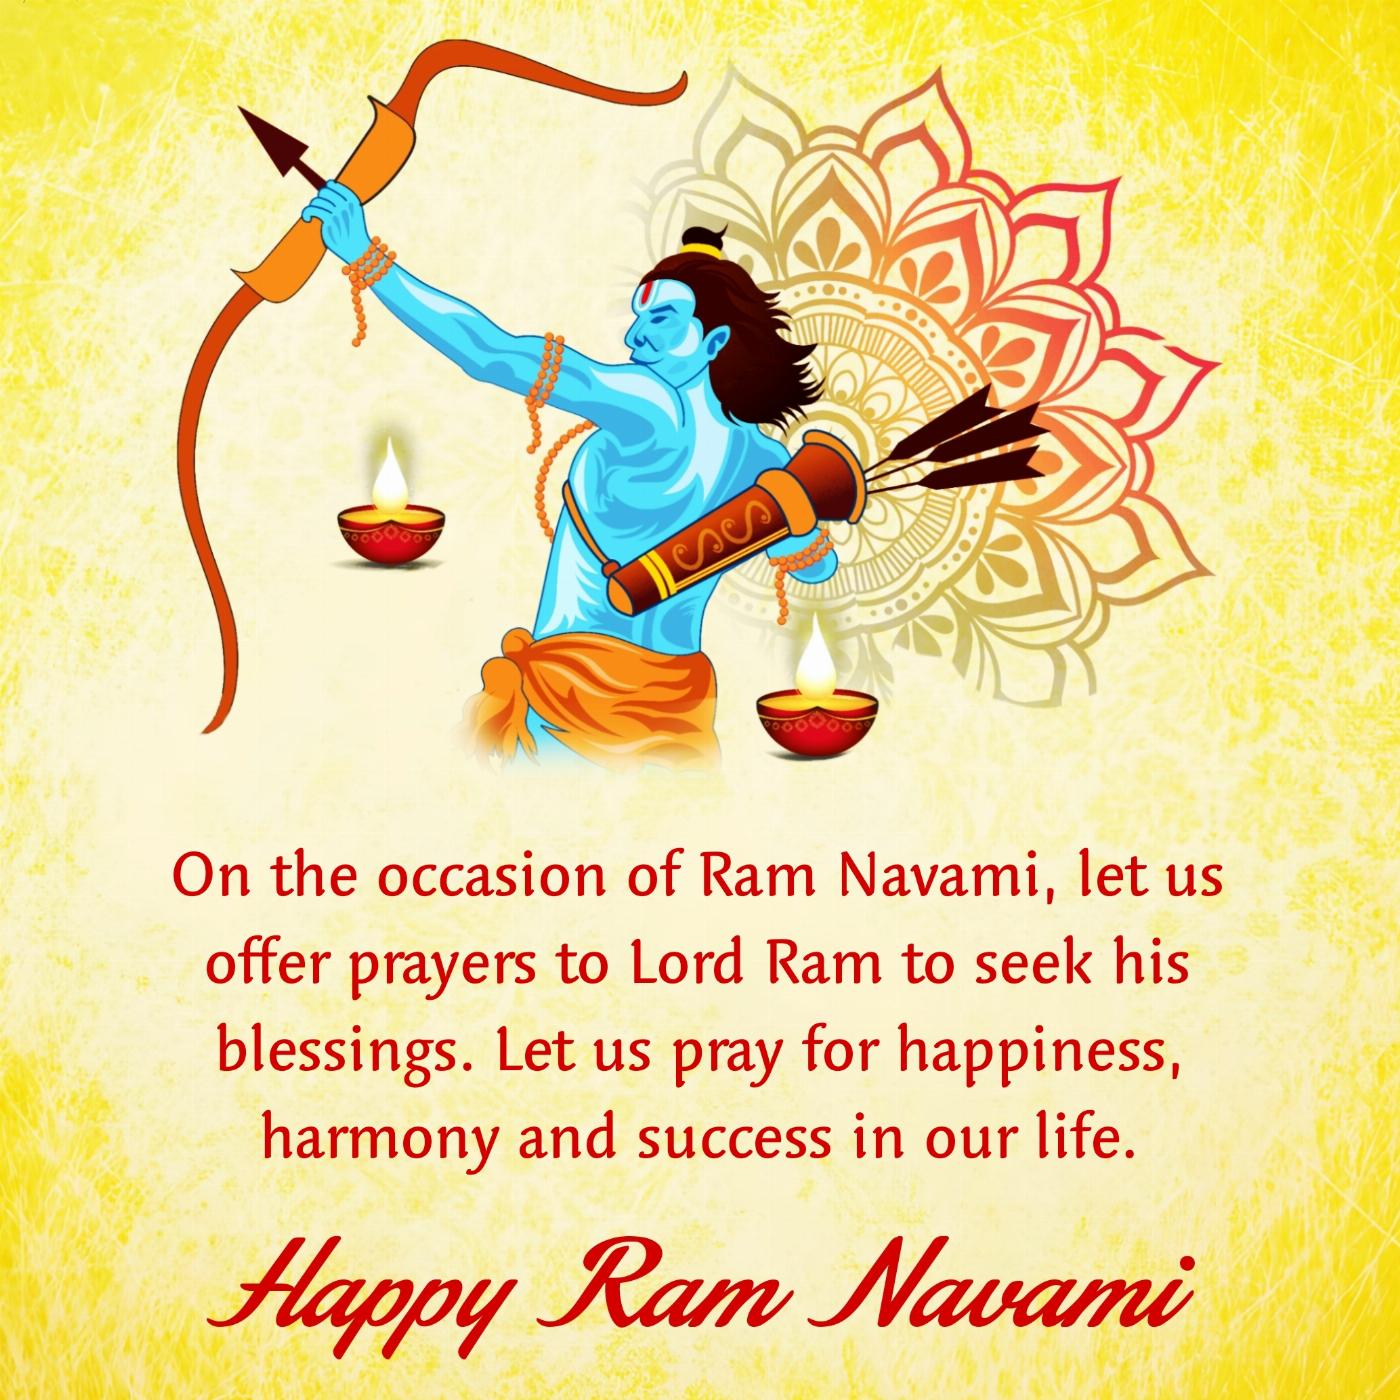 On the occasion of Ram Navami let us offer prayers